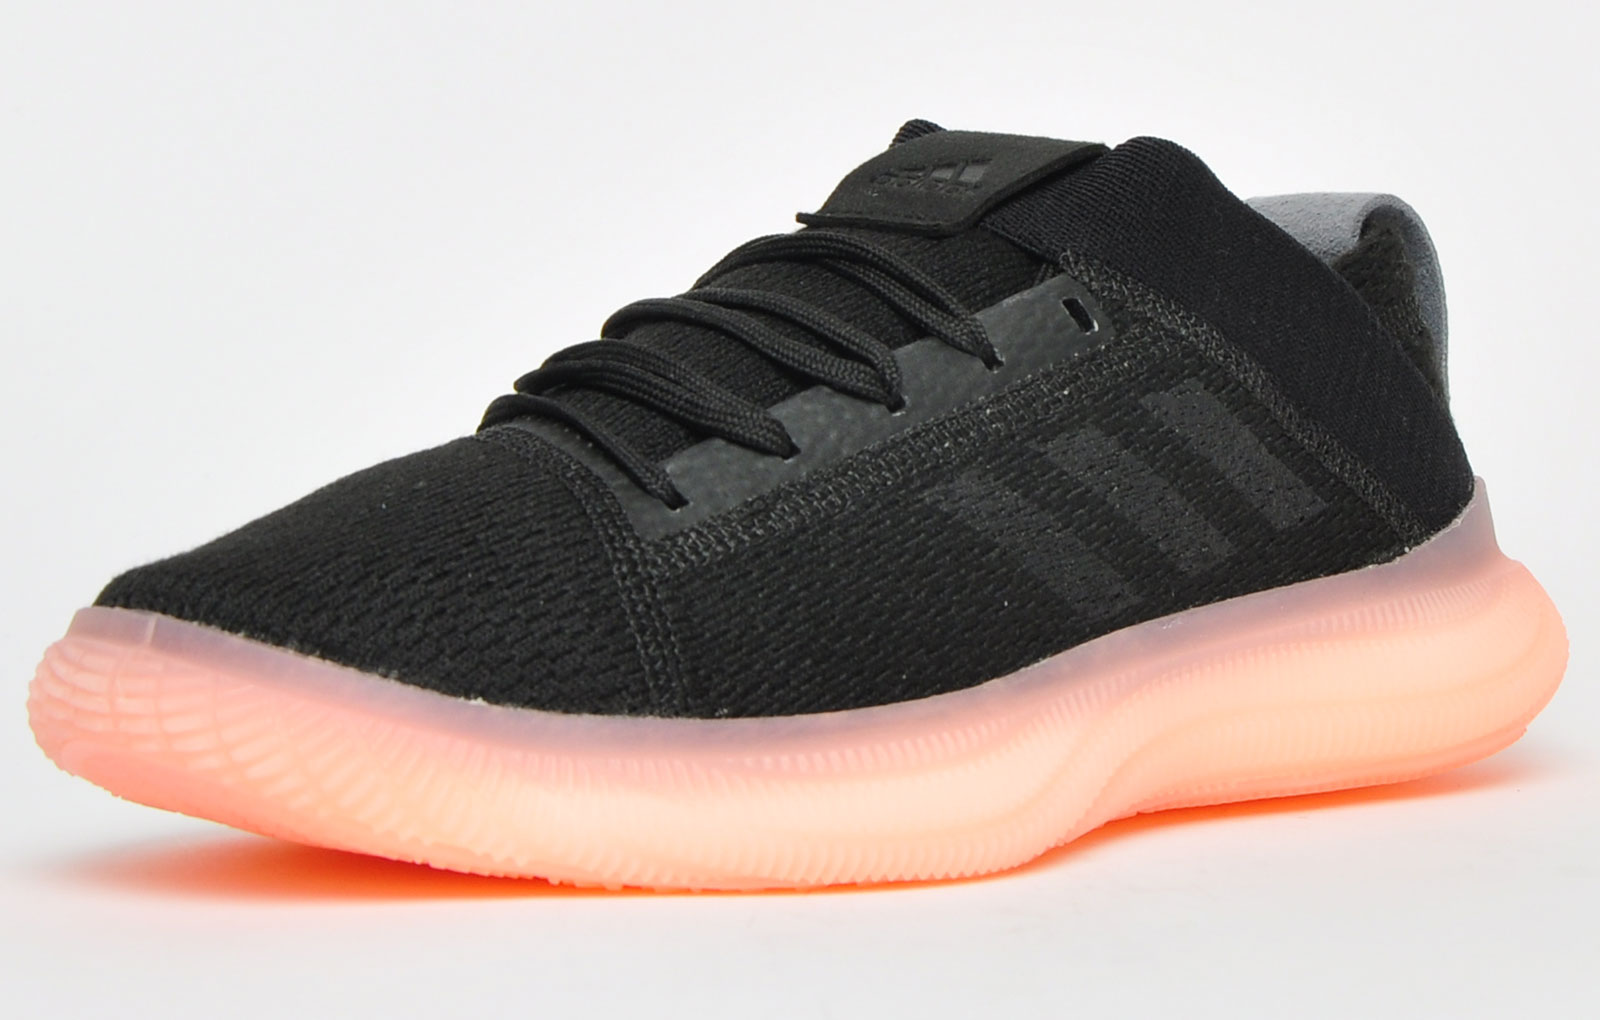 Adidas PureBOOST Trainer Womens Trainers, Size 5.5 in Black / Salmon - By Express Trainers